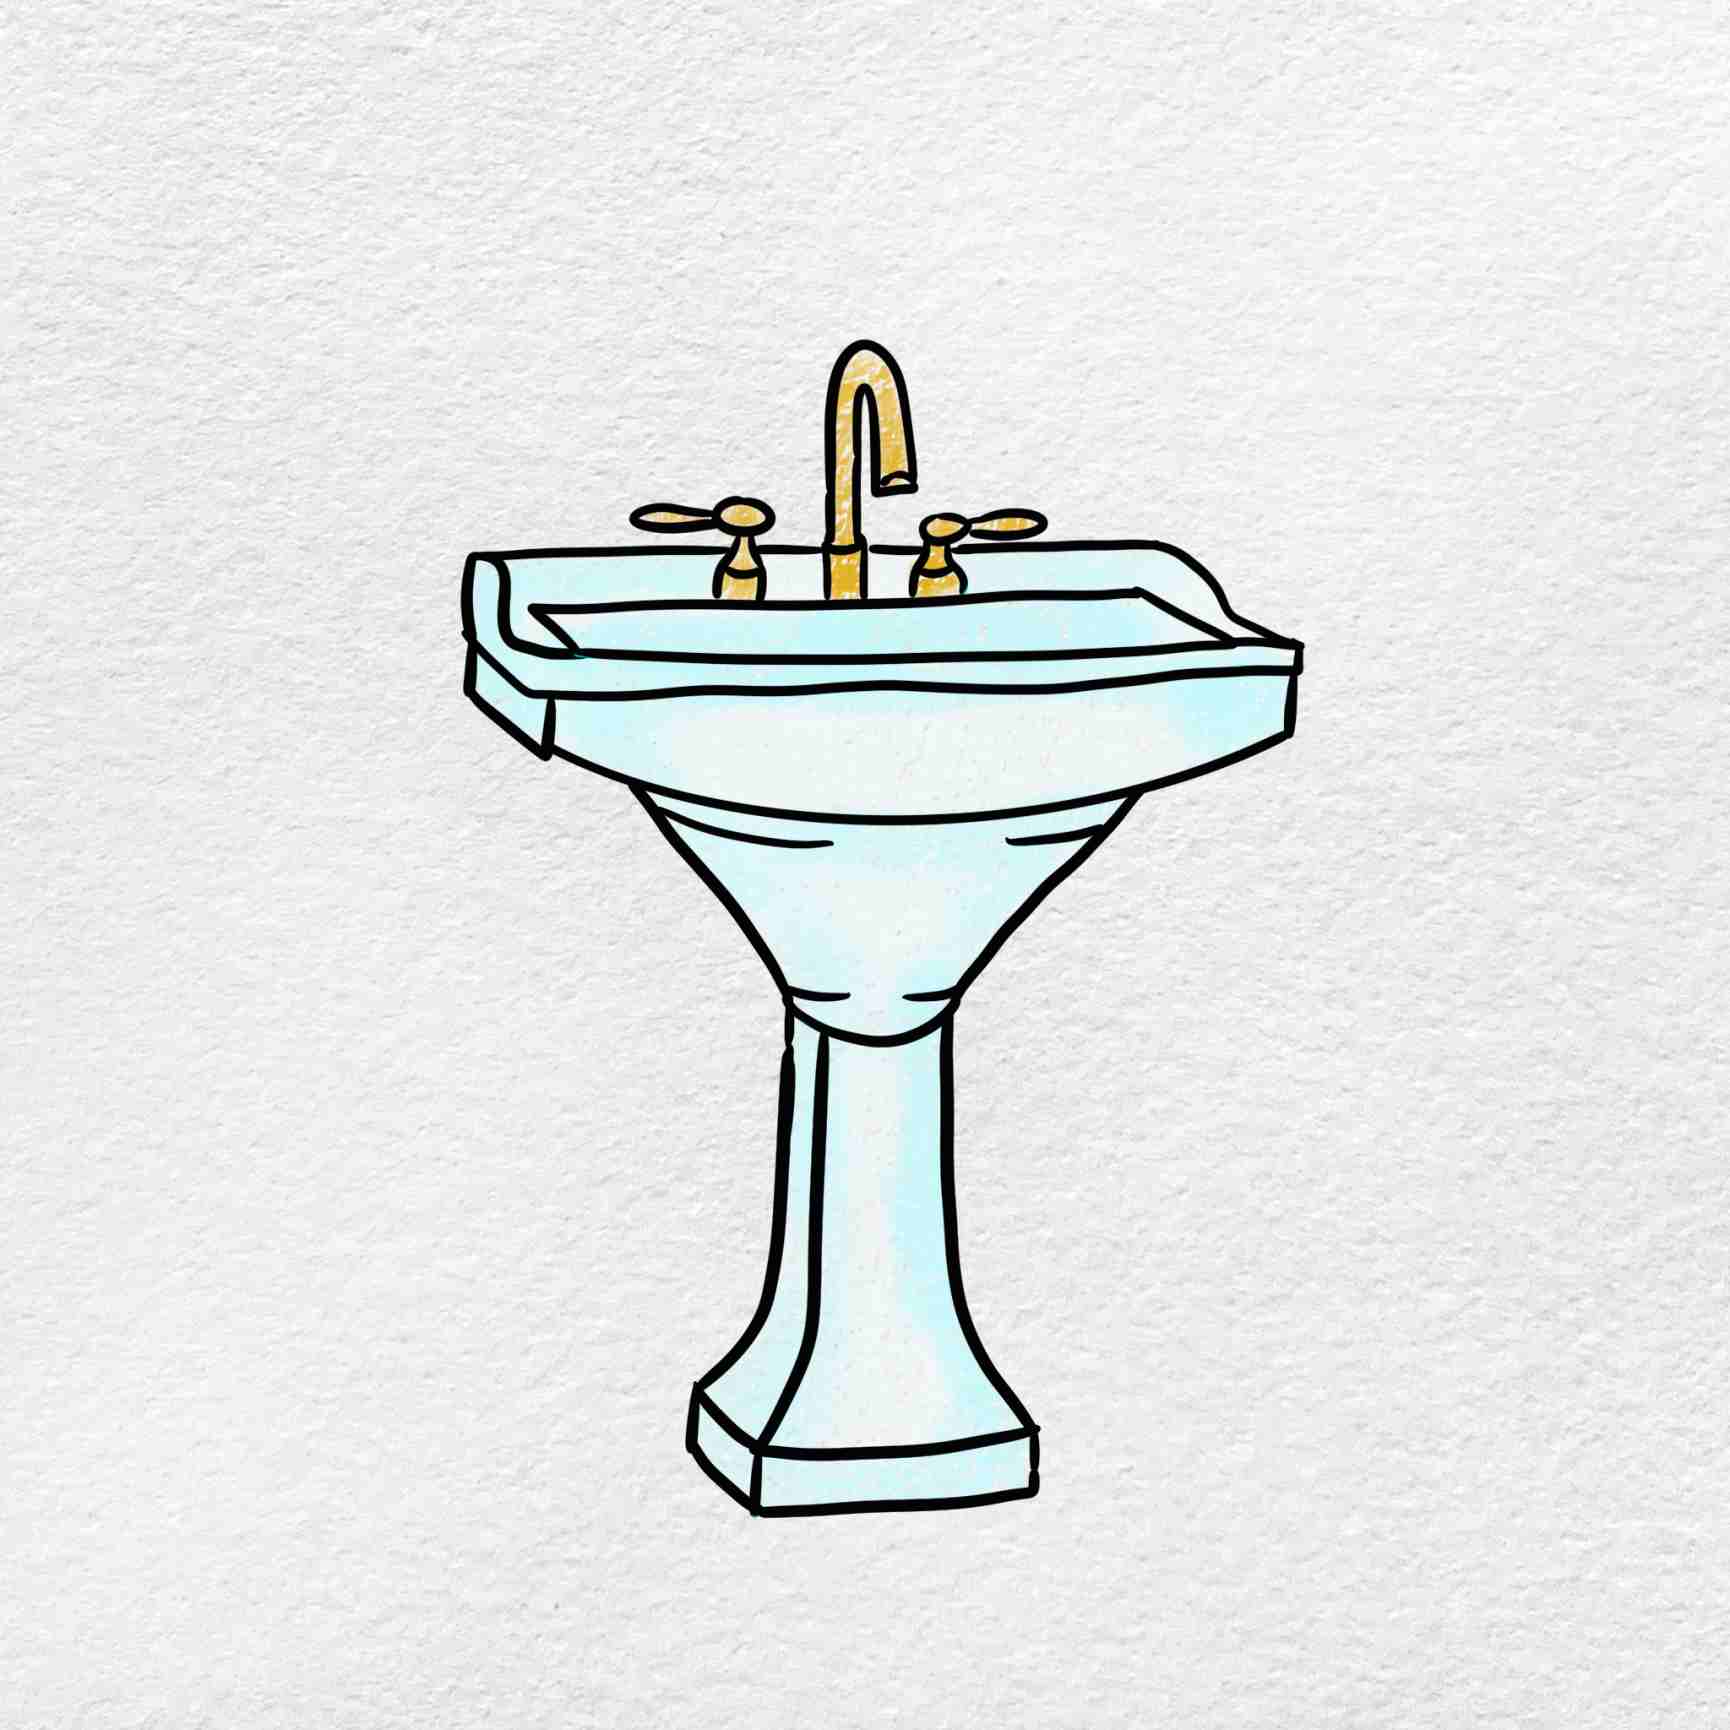 How to draw a sink